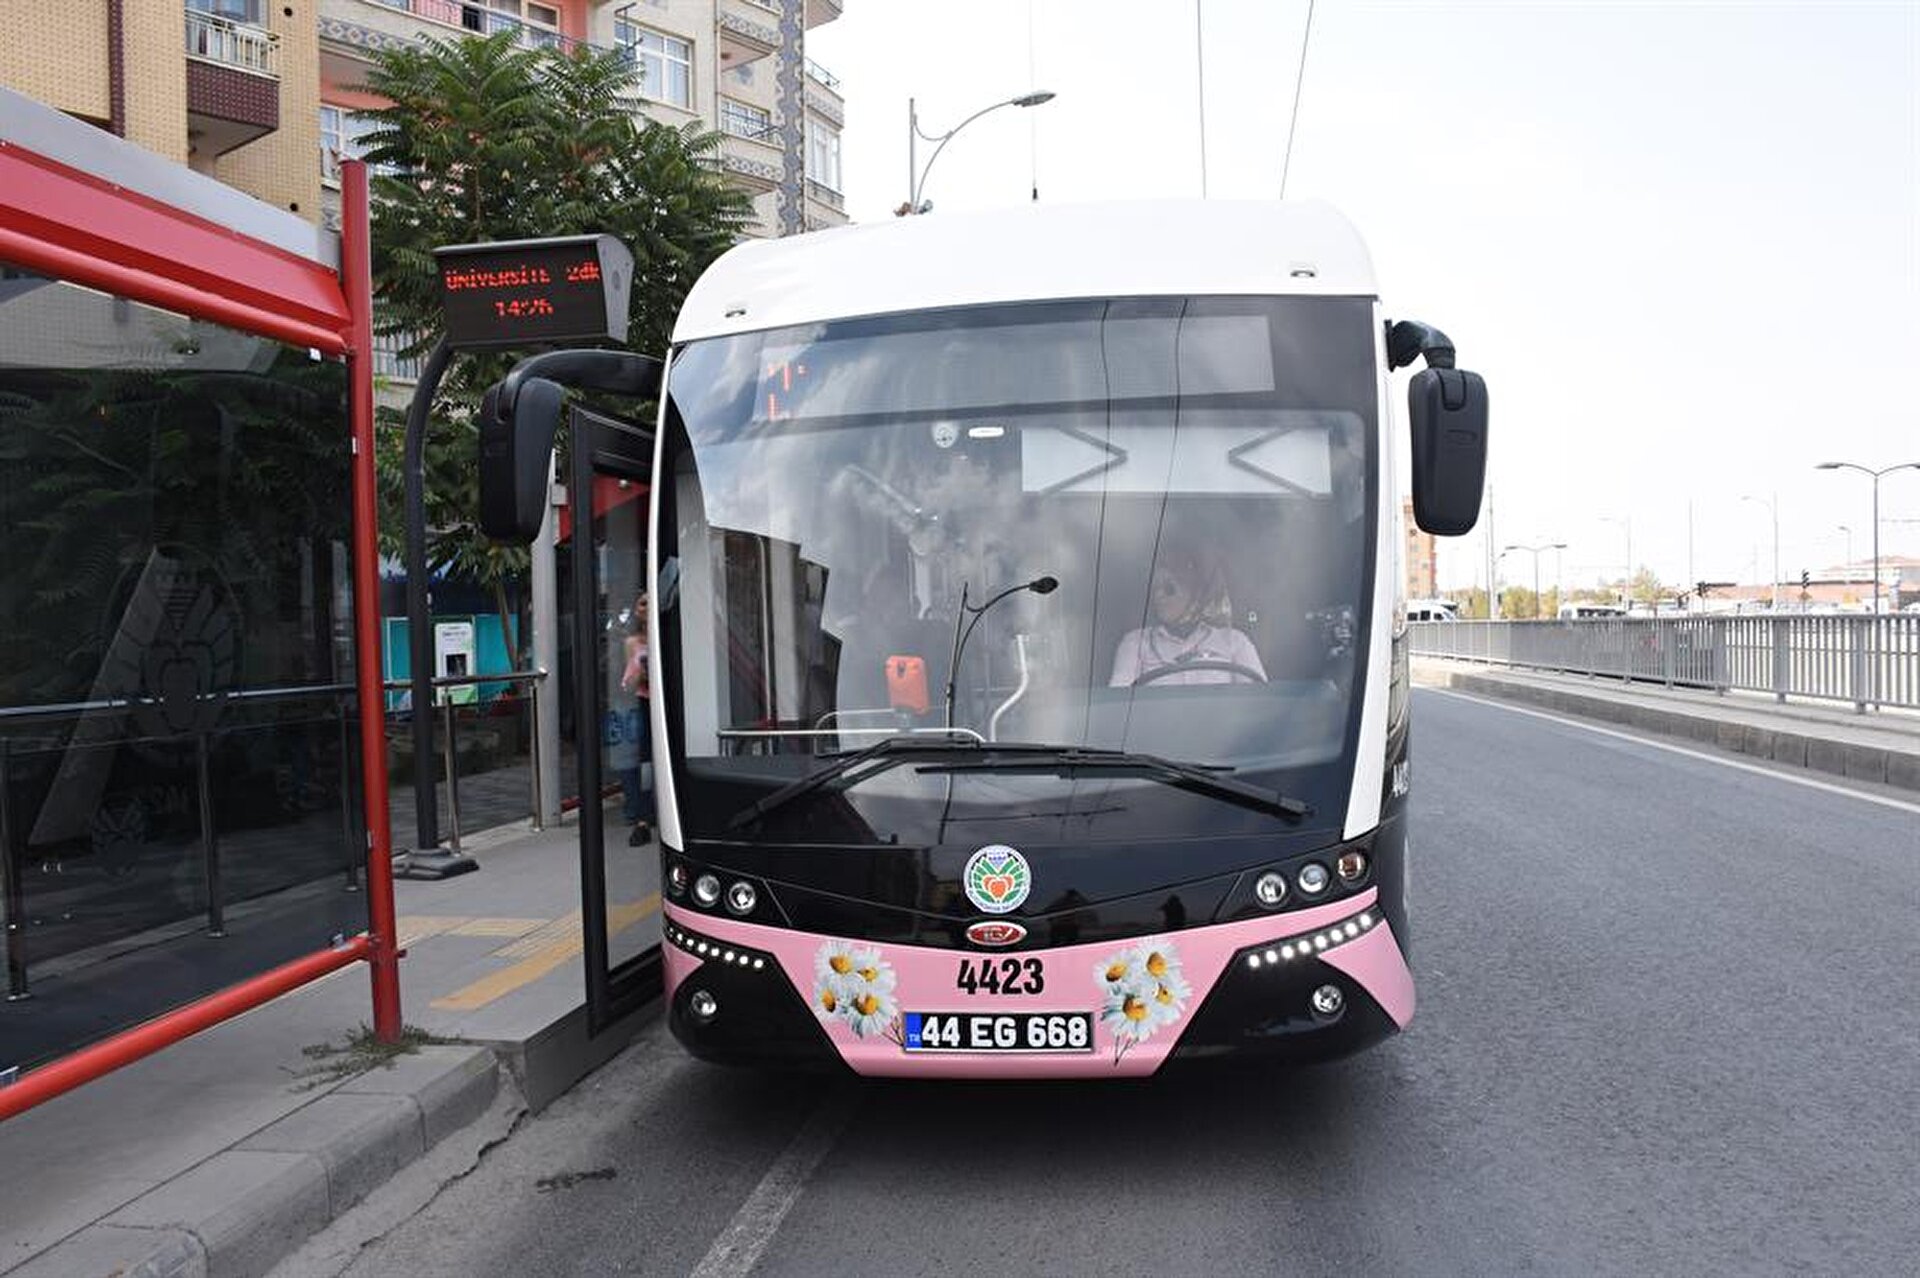 Women’s-only pink trambuses introduced in Turkey